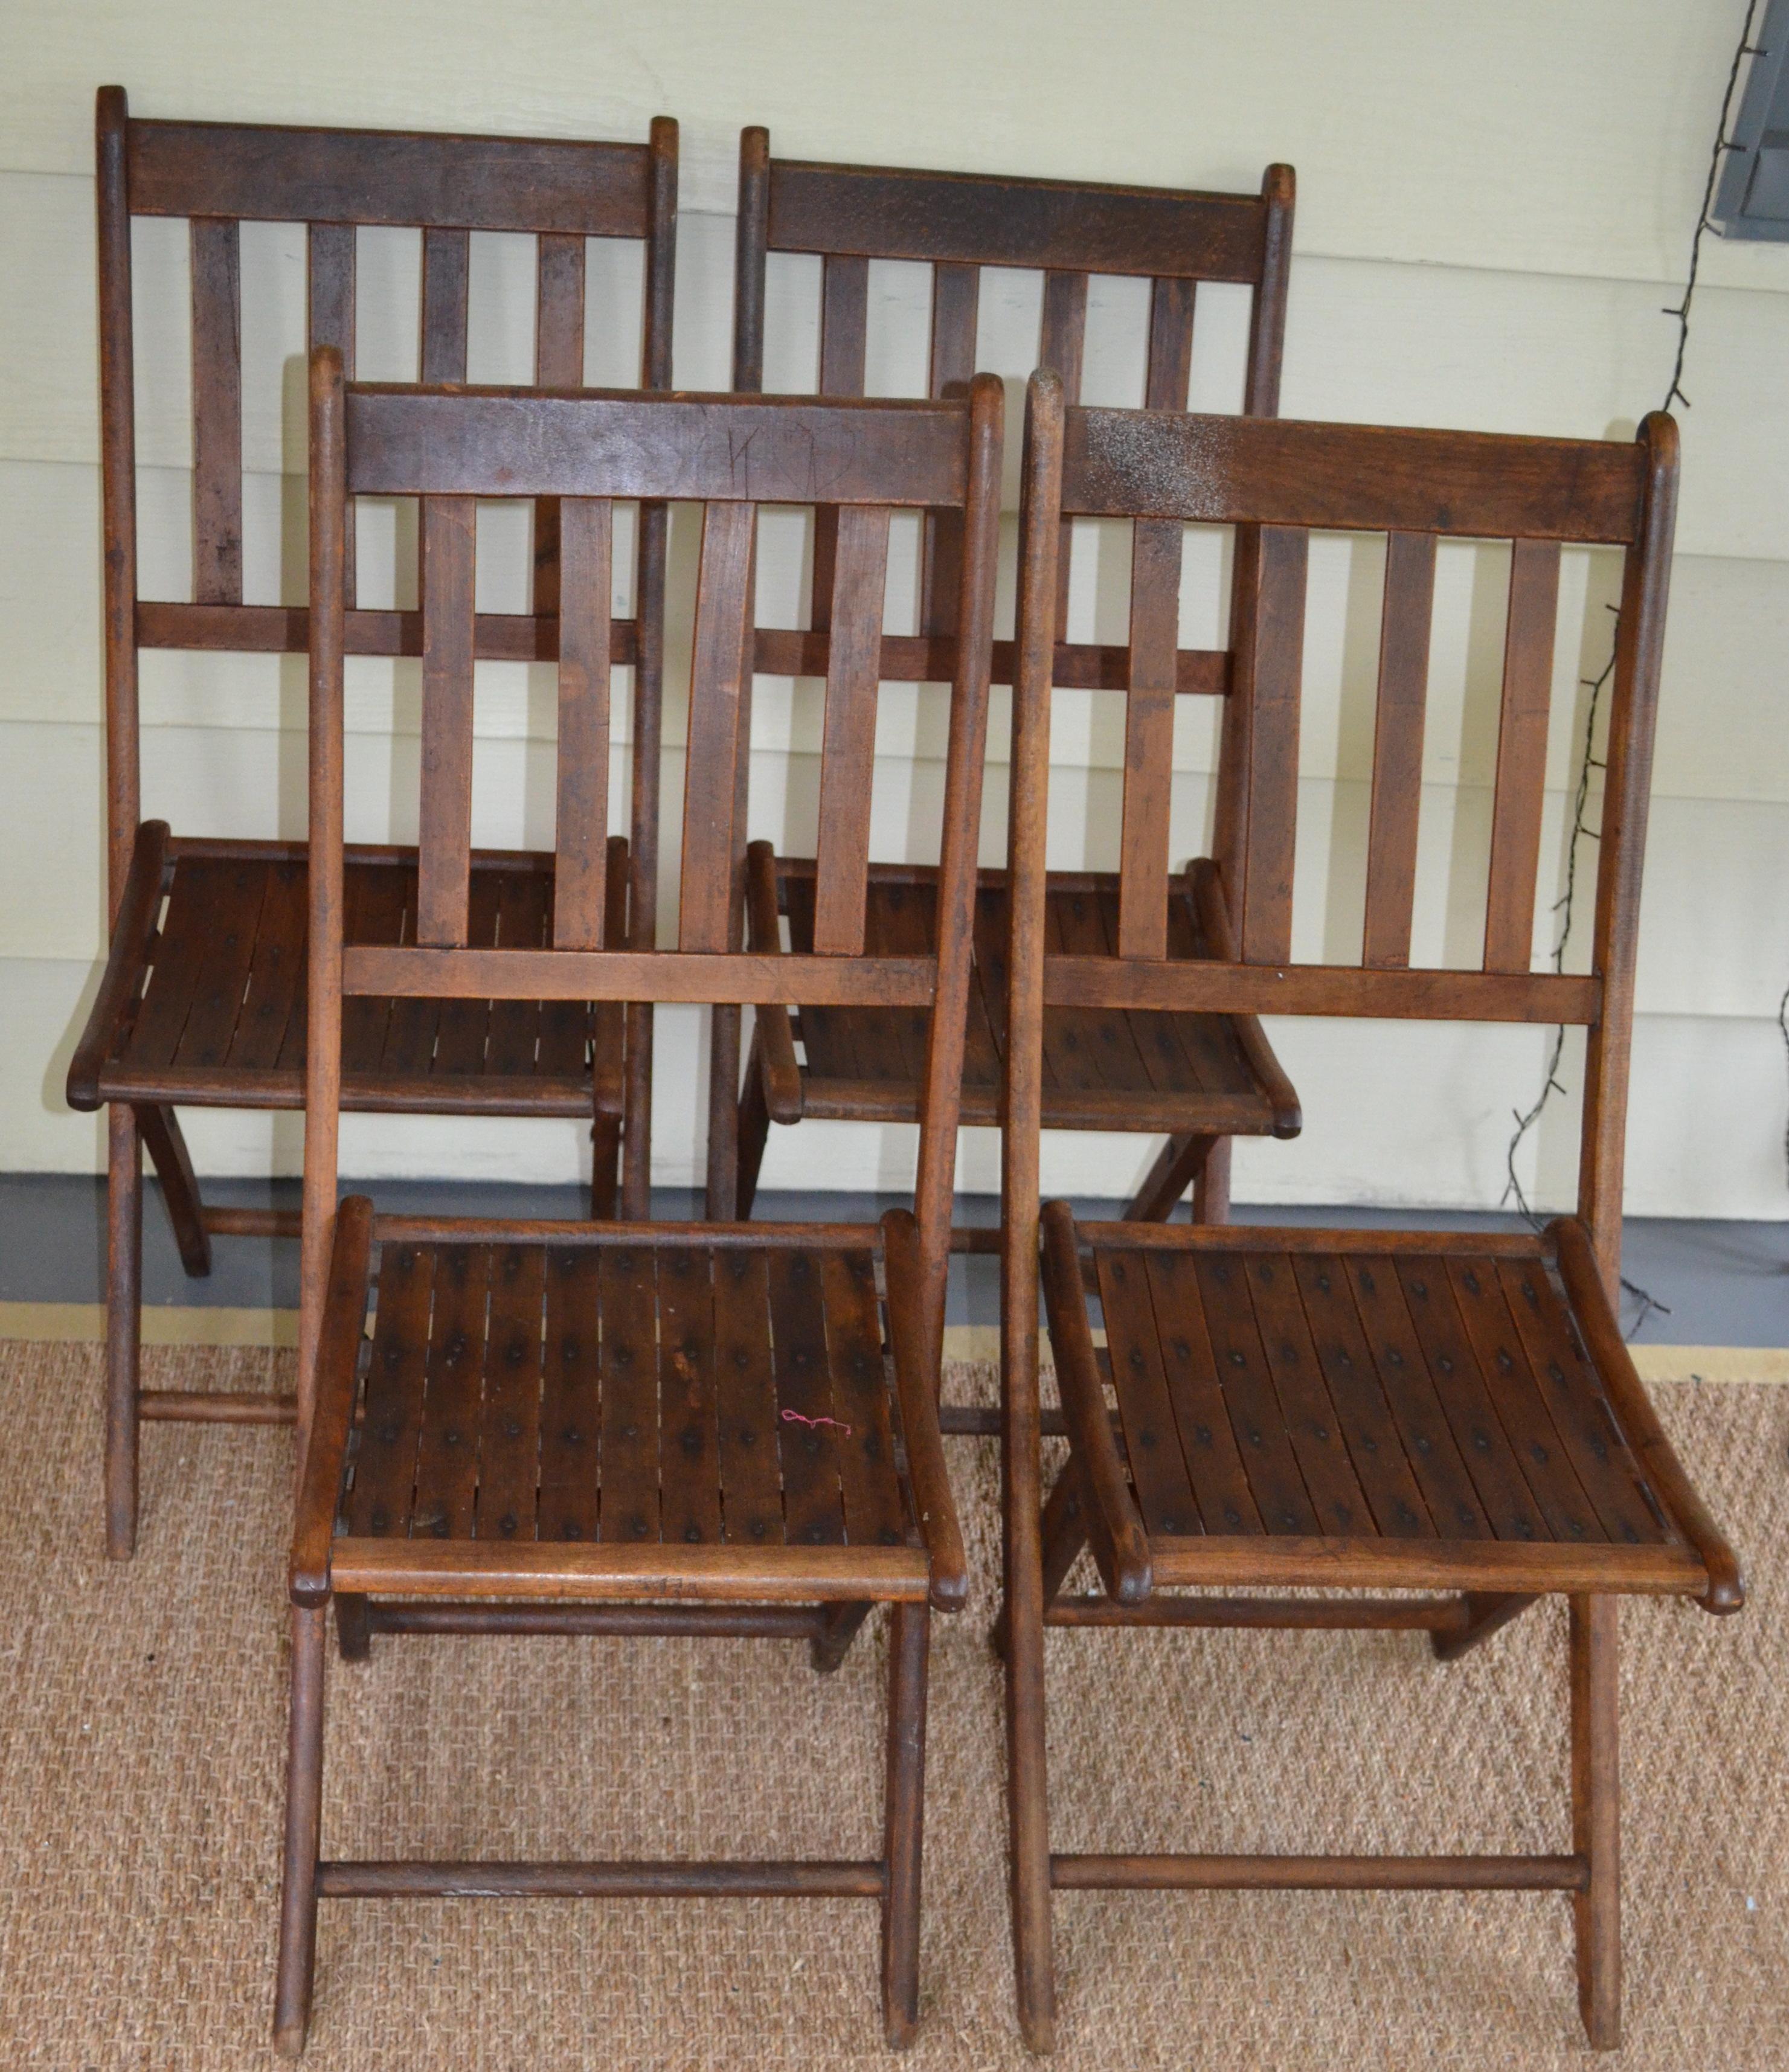 Schoolhouse Chairs of Oak, Folding, Late 19th Century European, Set of 4, Multiple Sets For Sale